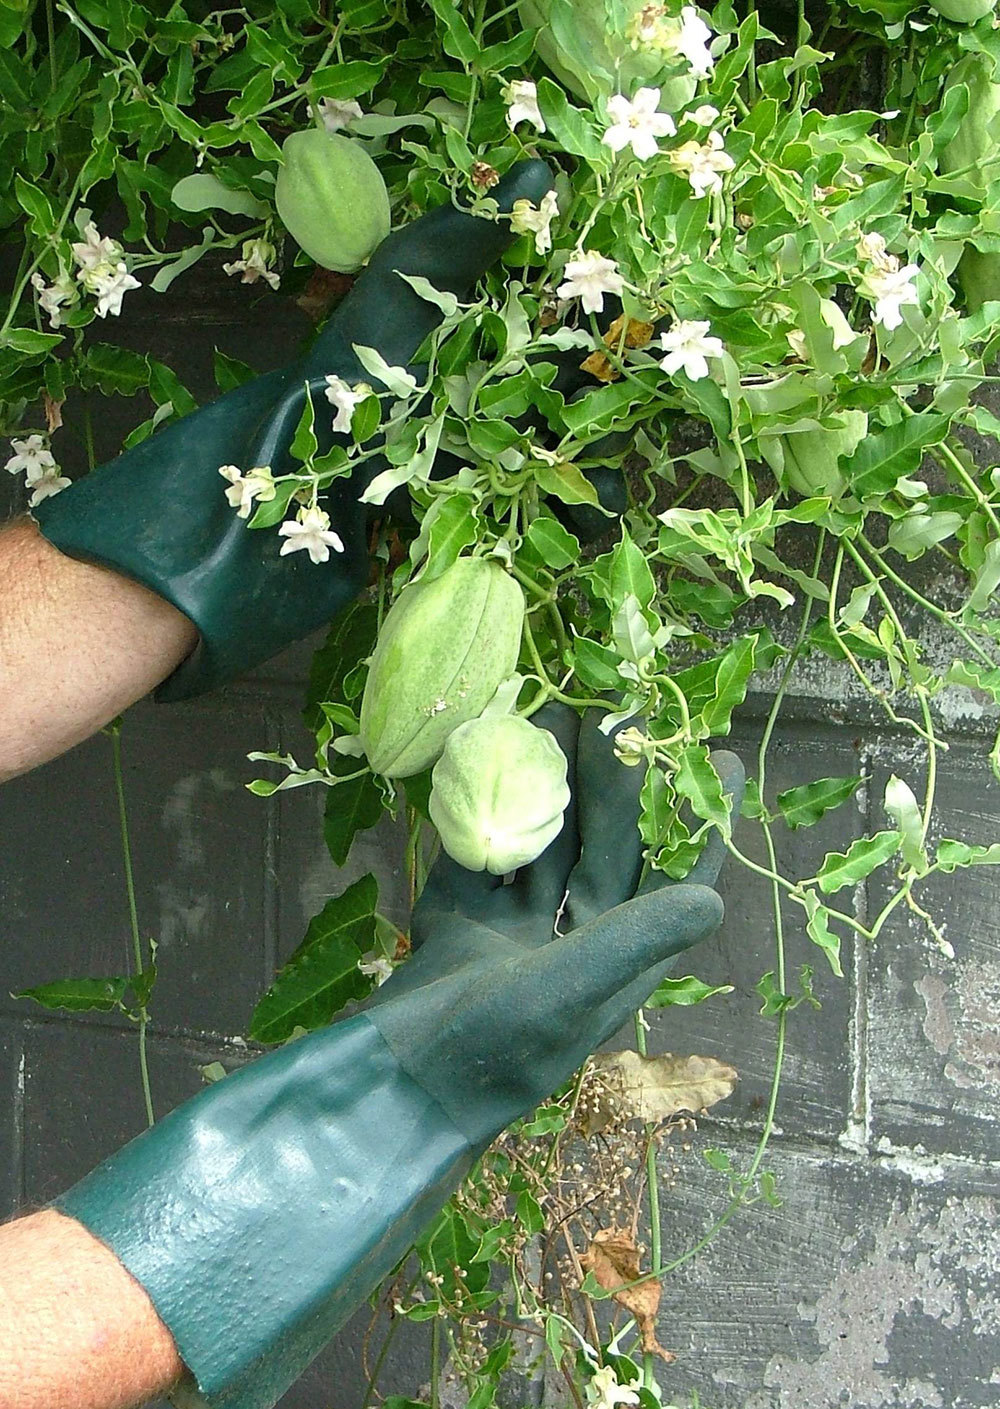 Hands in gloves holding moth plant pods and flowers.